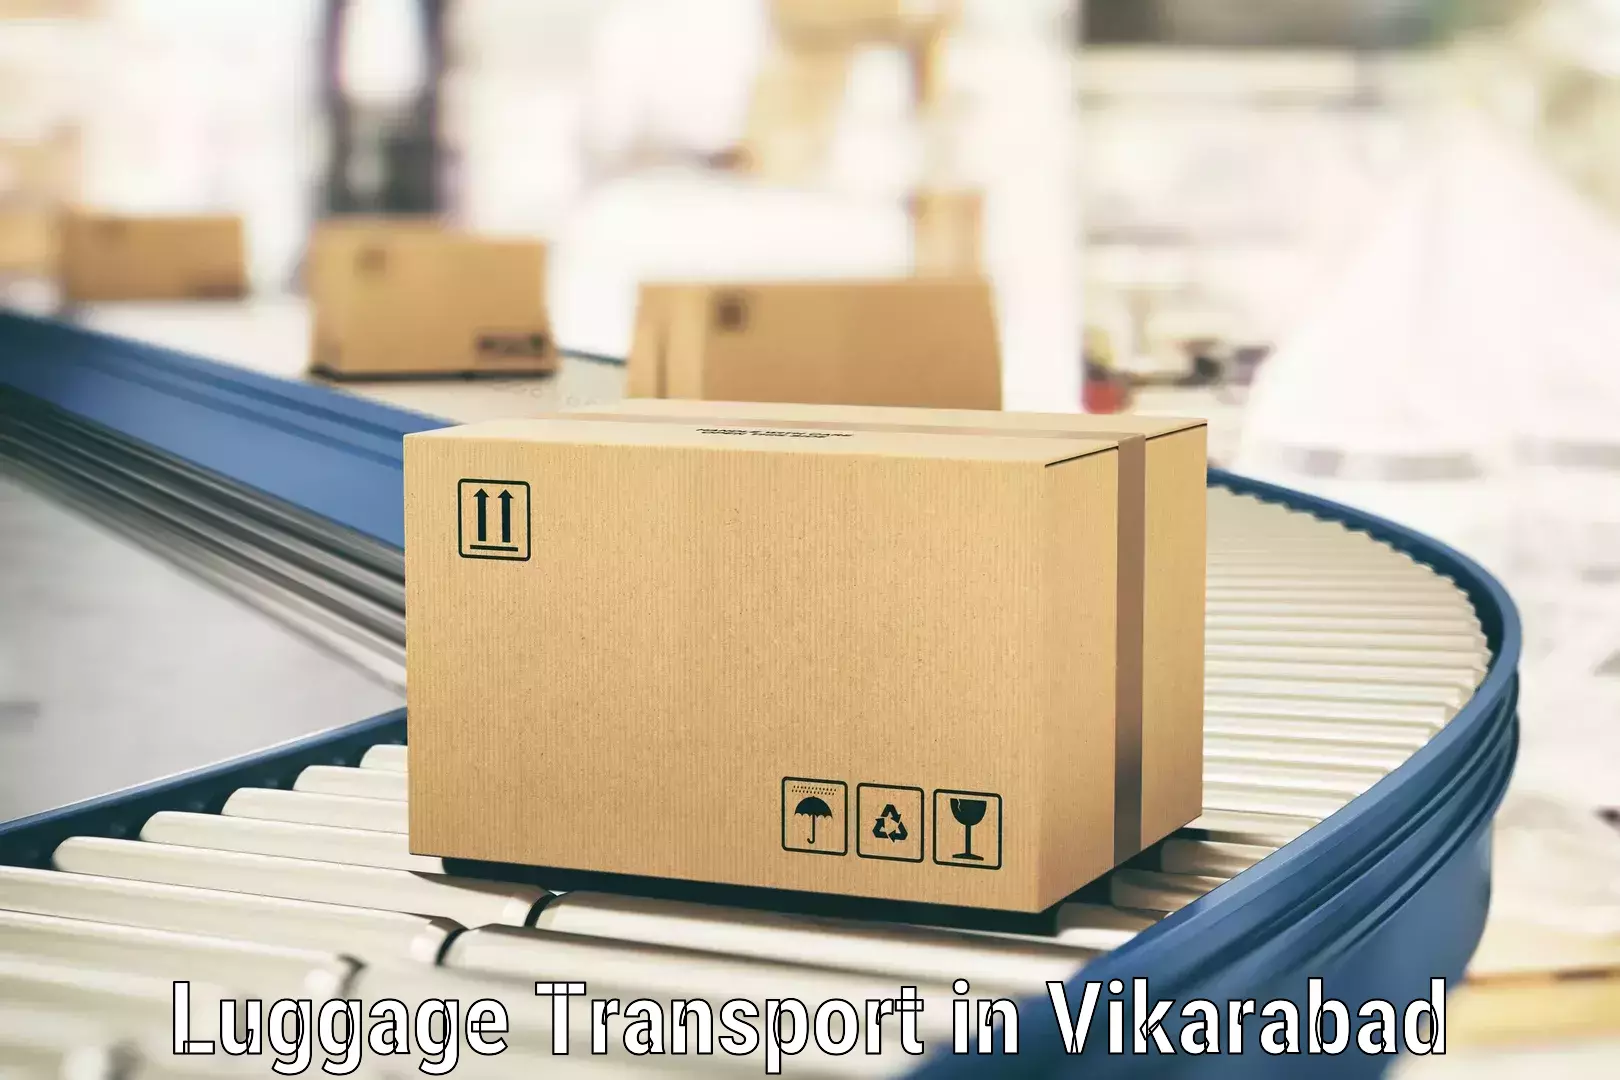 Luggage delivery operations in Vikarabad